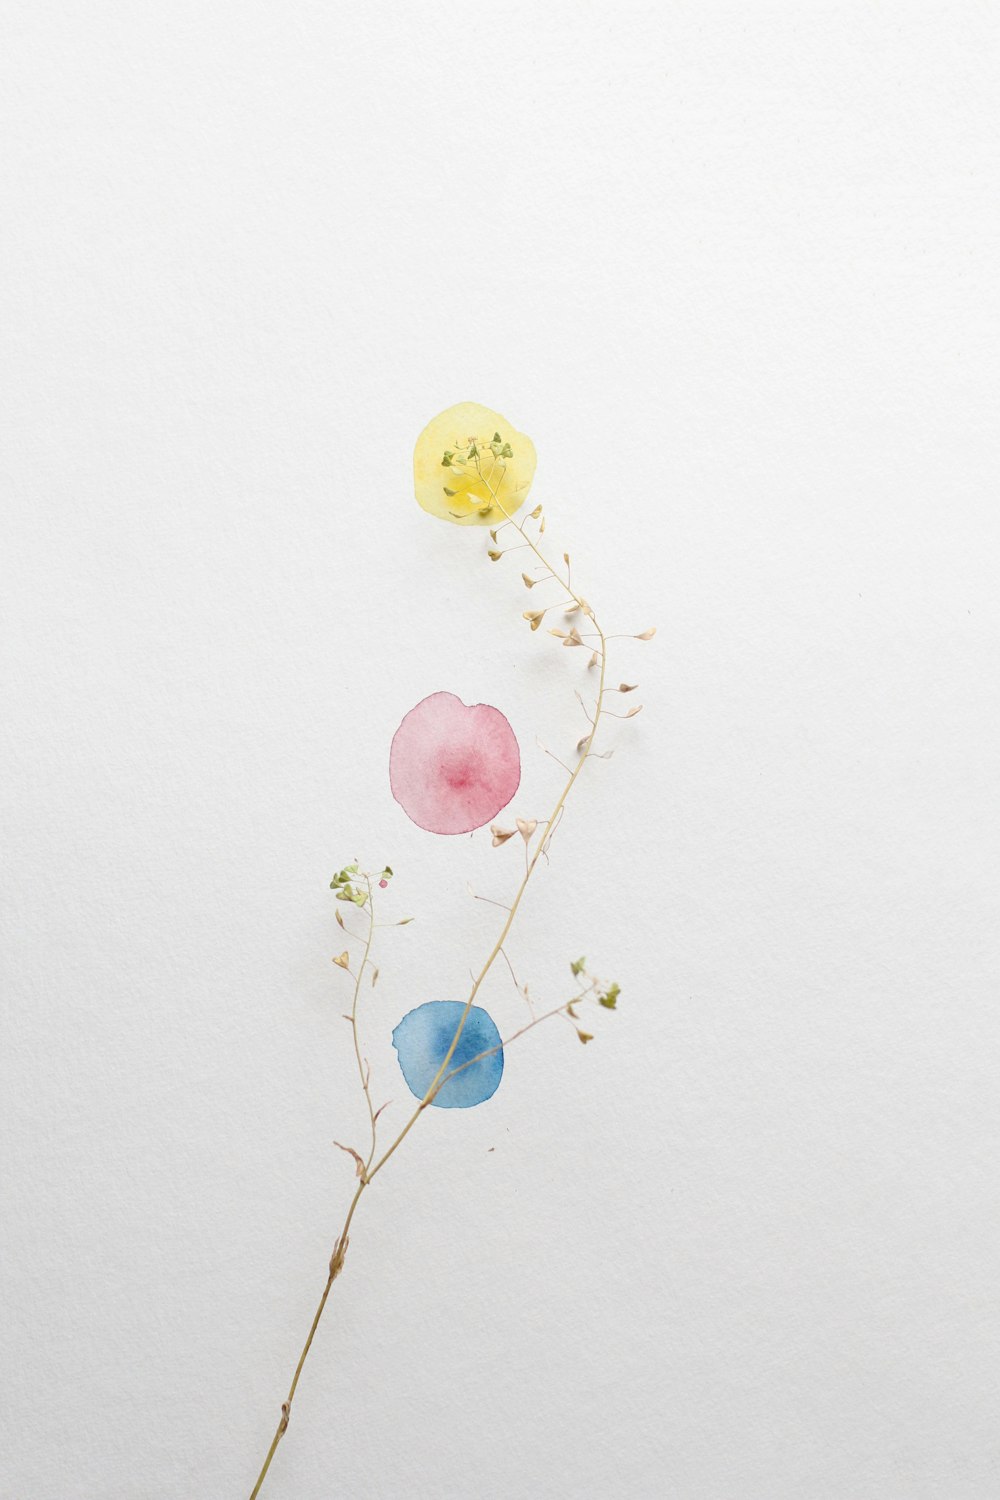 a watercolor painting of a flower and a balloon